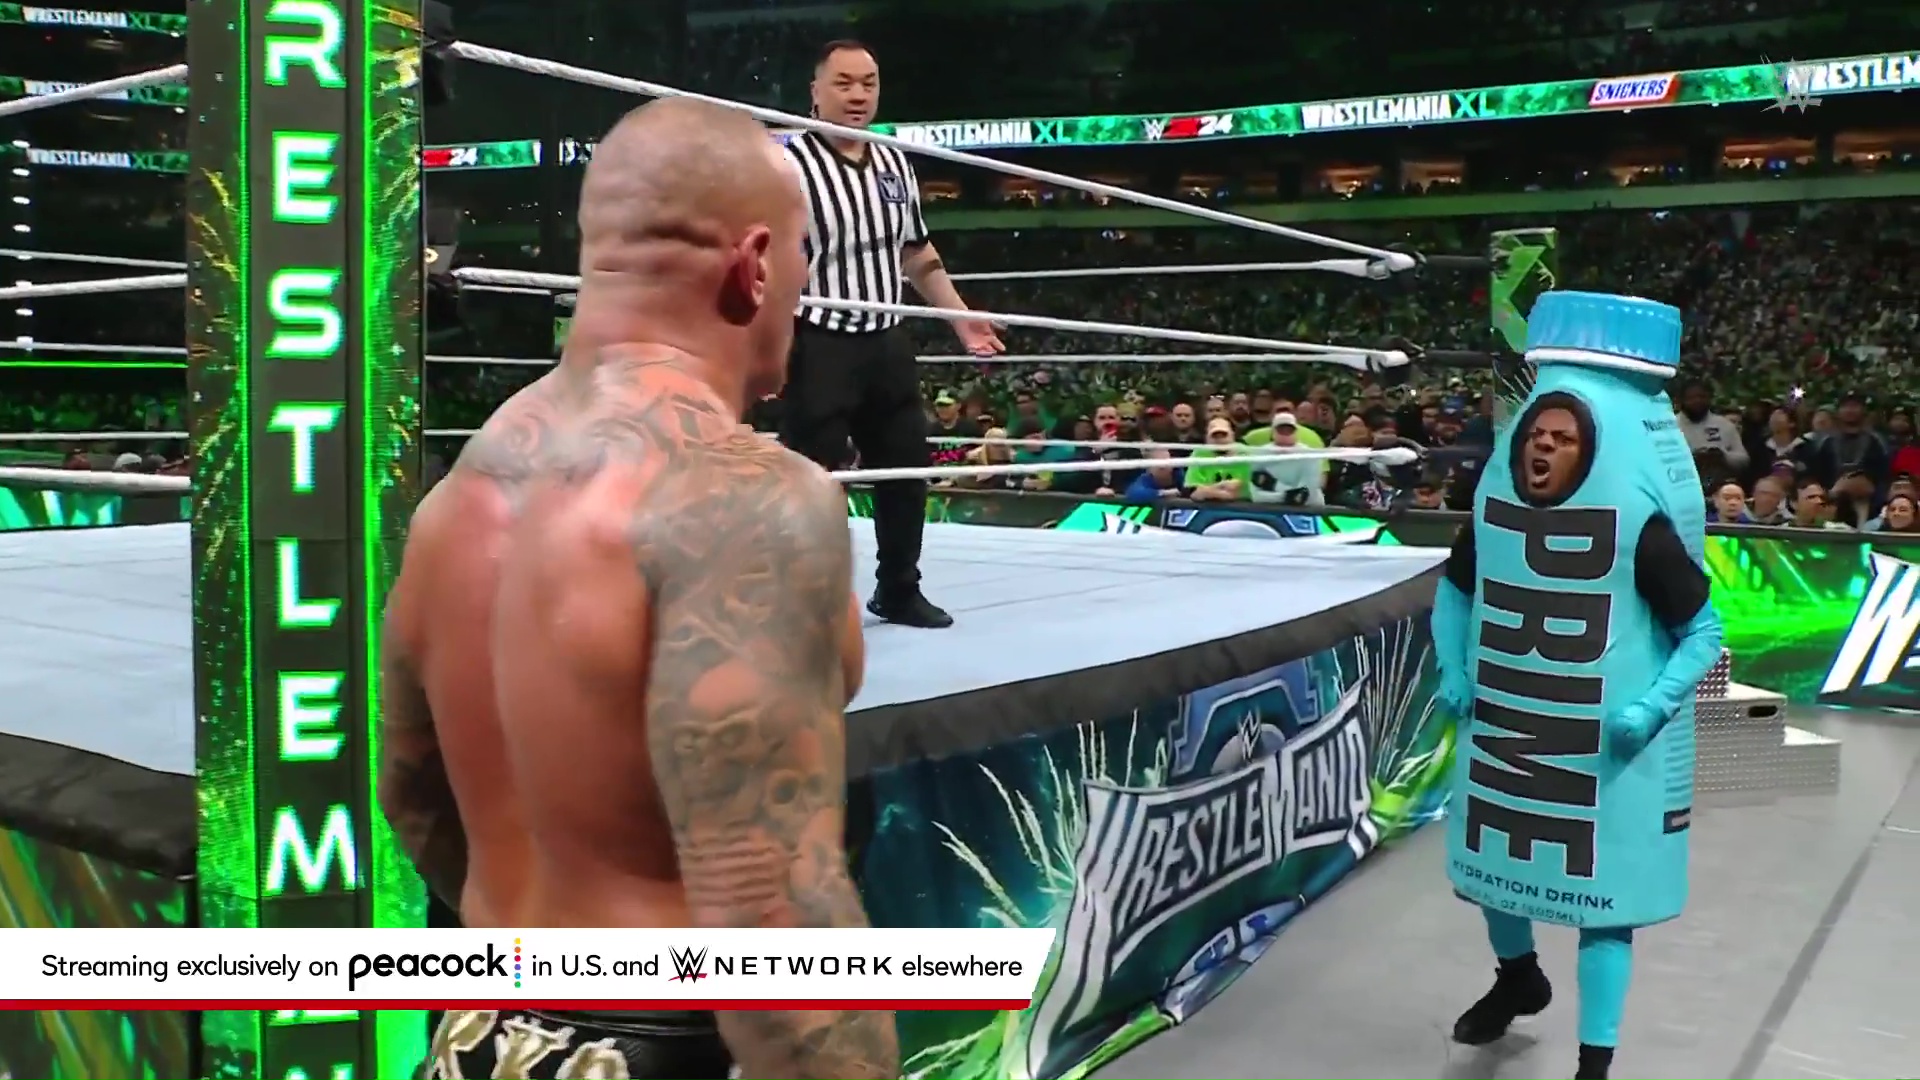 Orton launched an attack on the streamer after he helped Paul